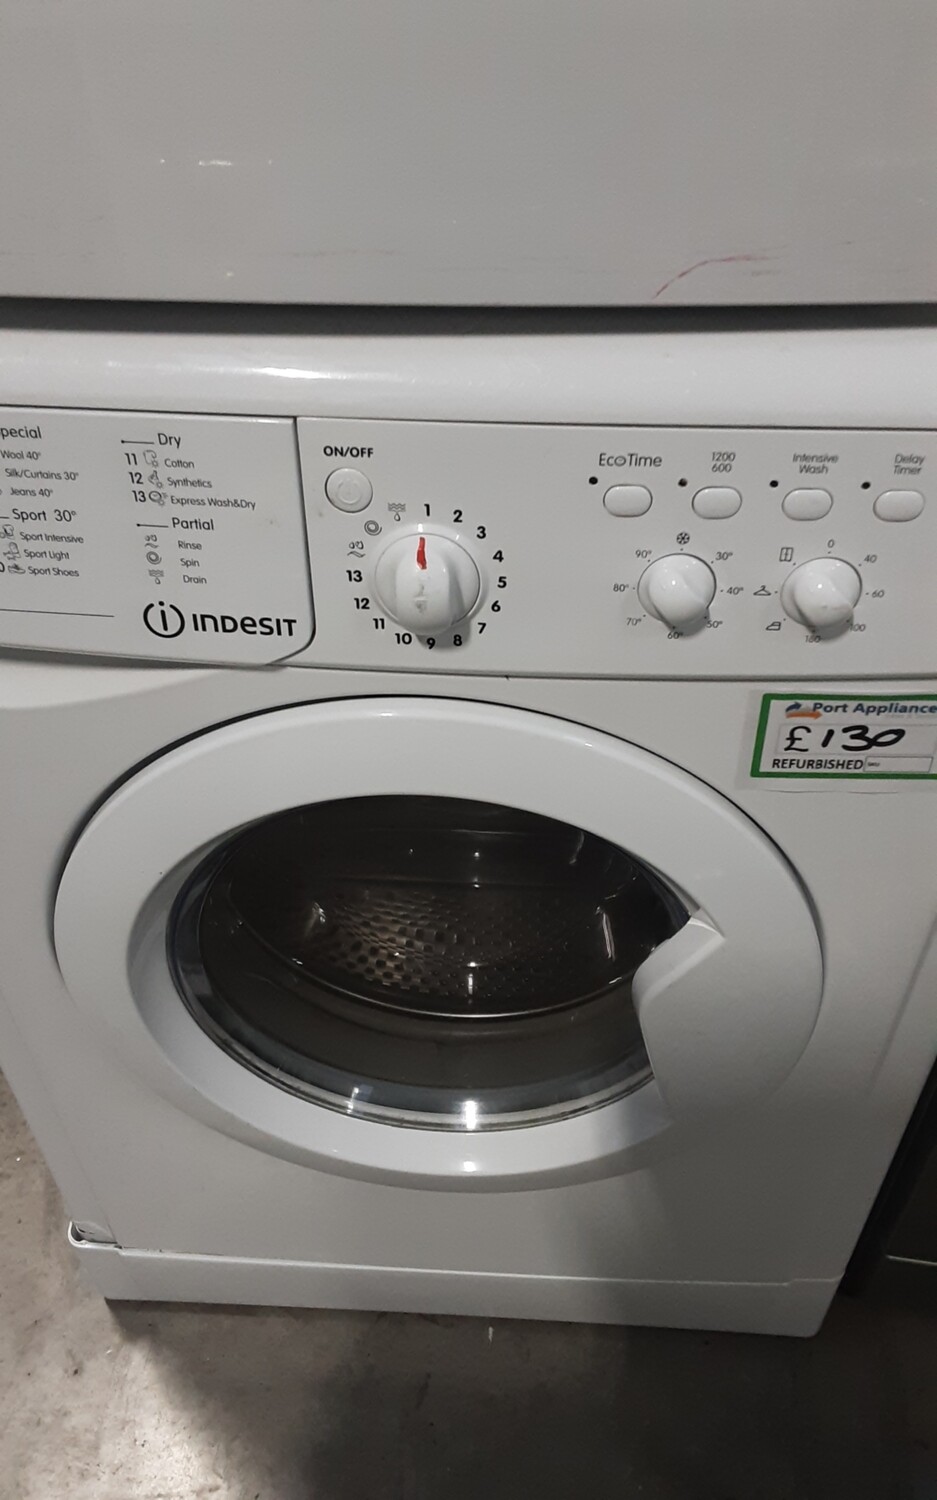 Indesit IWDC6125 6kg Load 1200 Spin Washing Machine Washer Dryer - White - Refurbished - 3 Month Guarantee. This item is located in our Whitby Road 